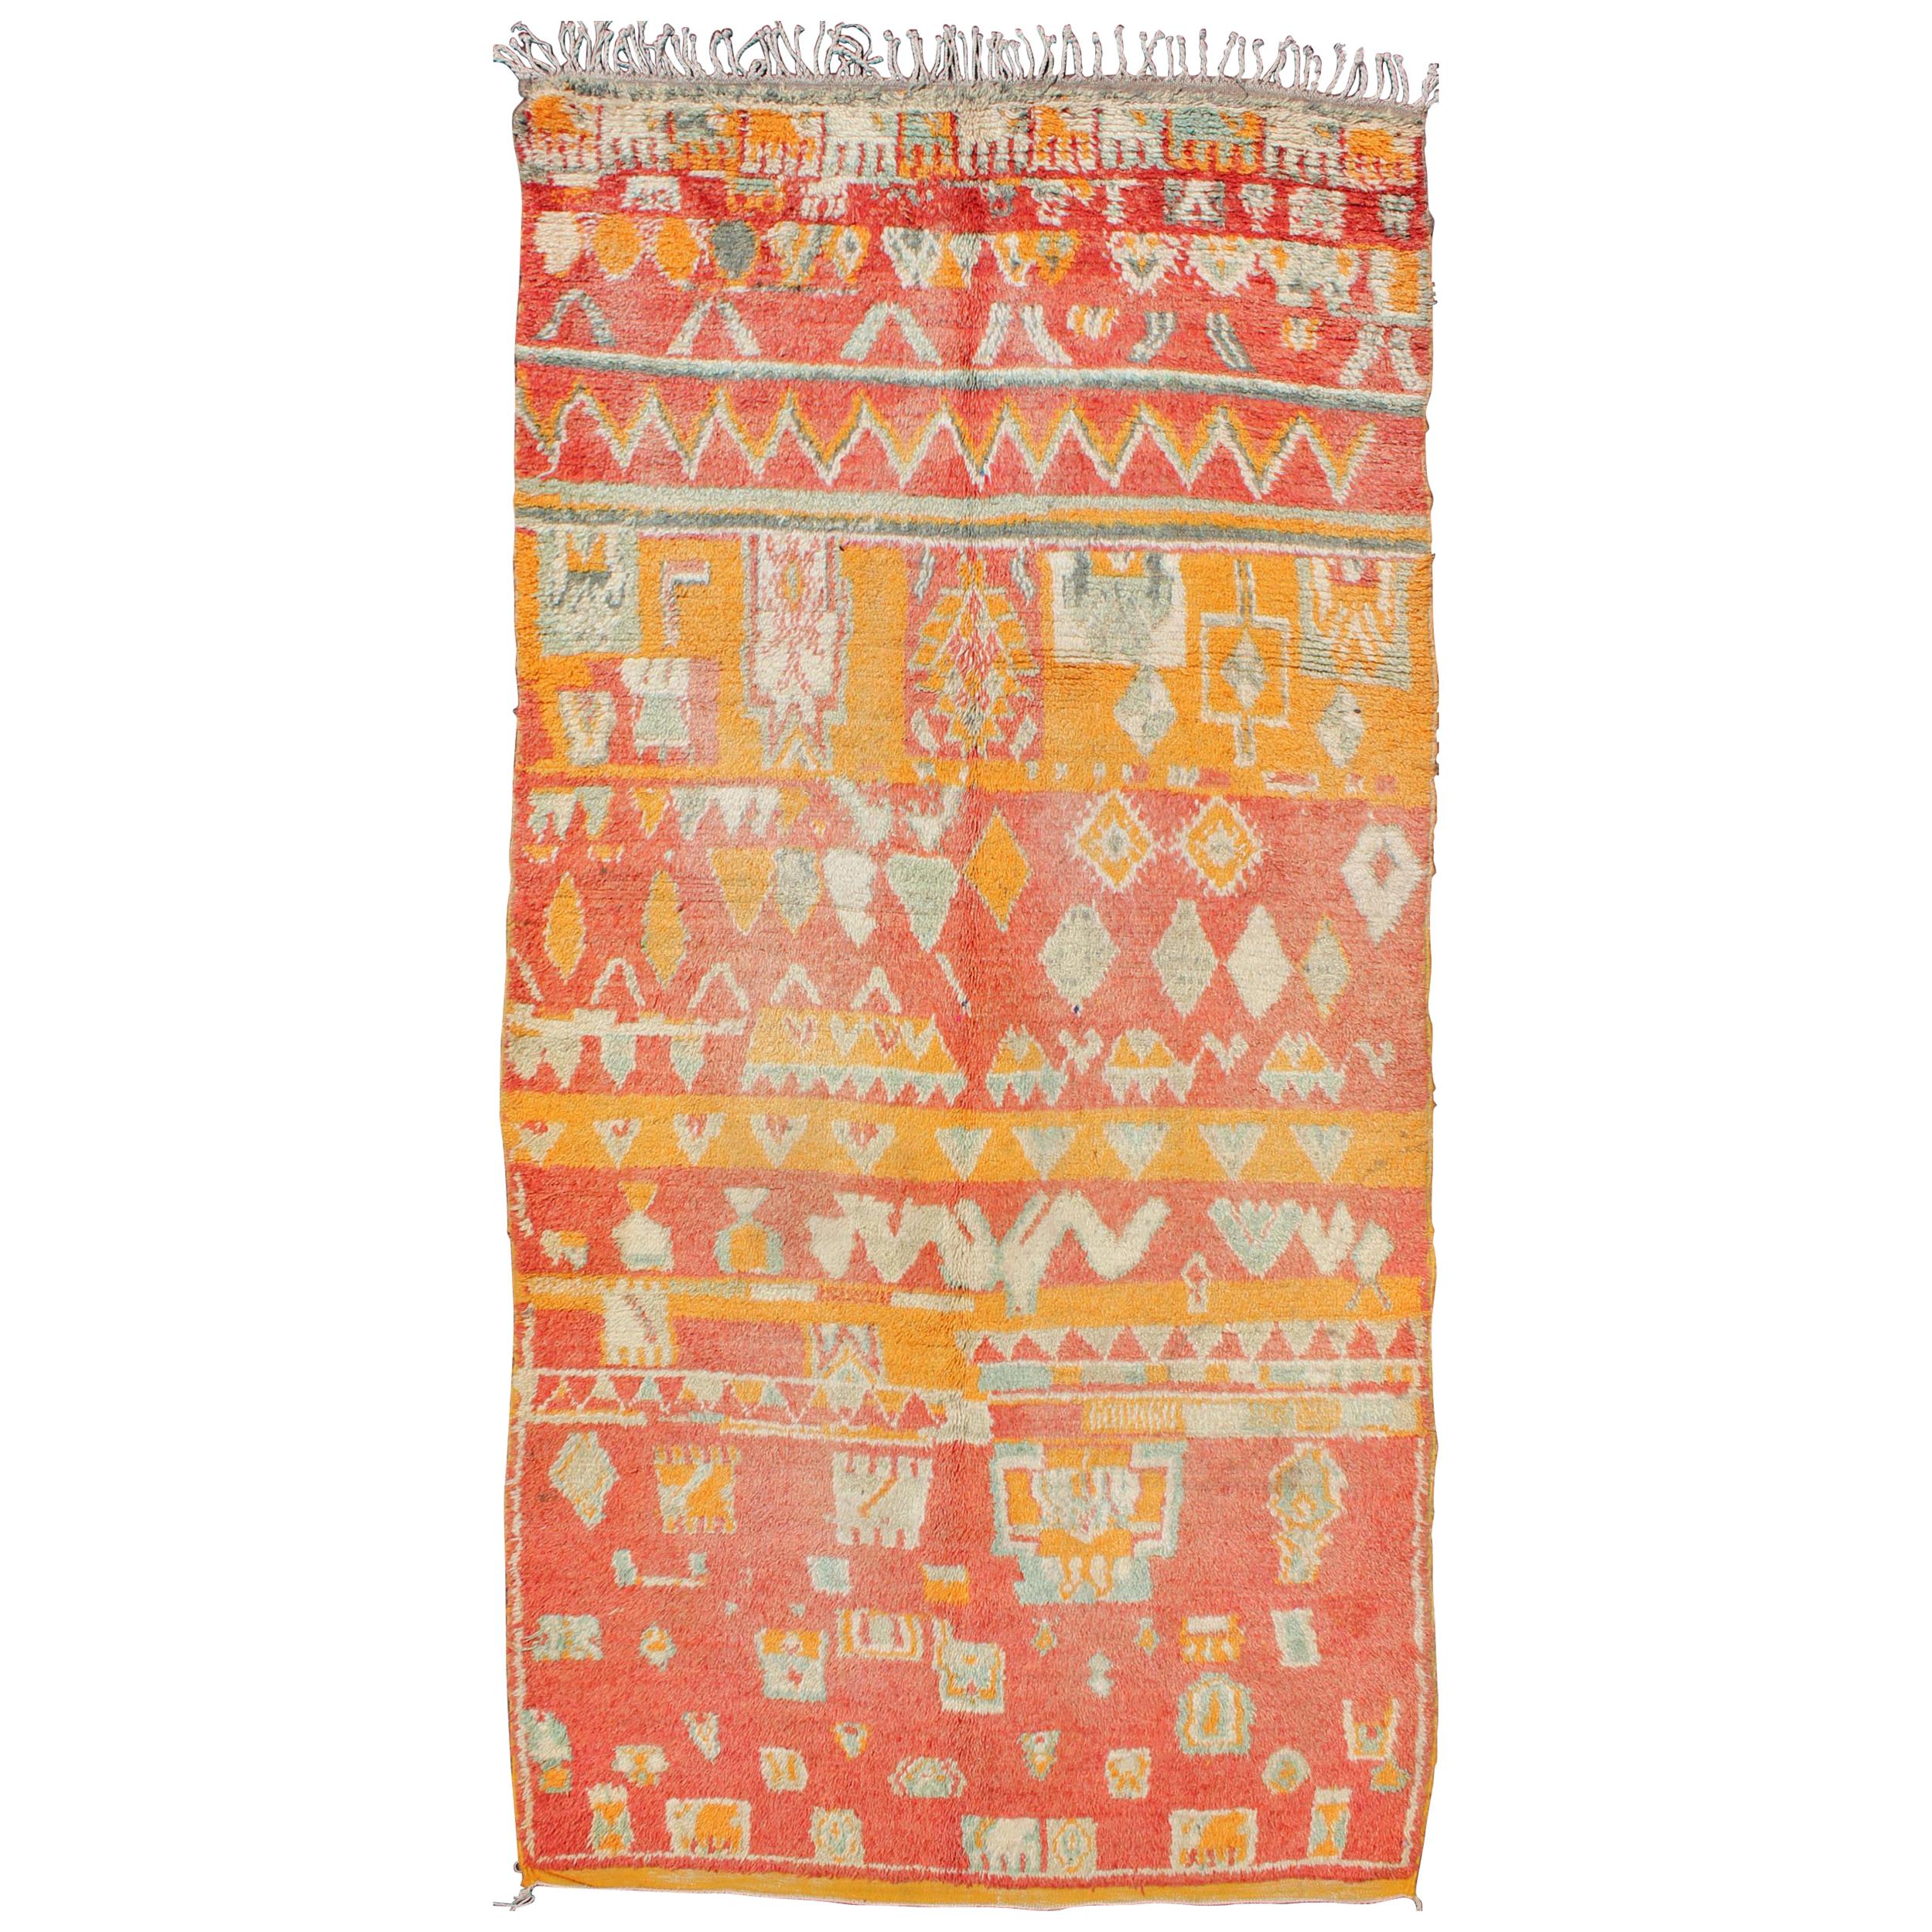 Tribal Design Vintage Moroccan Rug in Orange, Red, Mint Green and Ivory